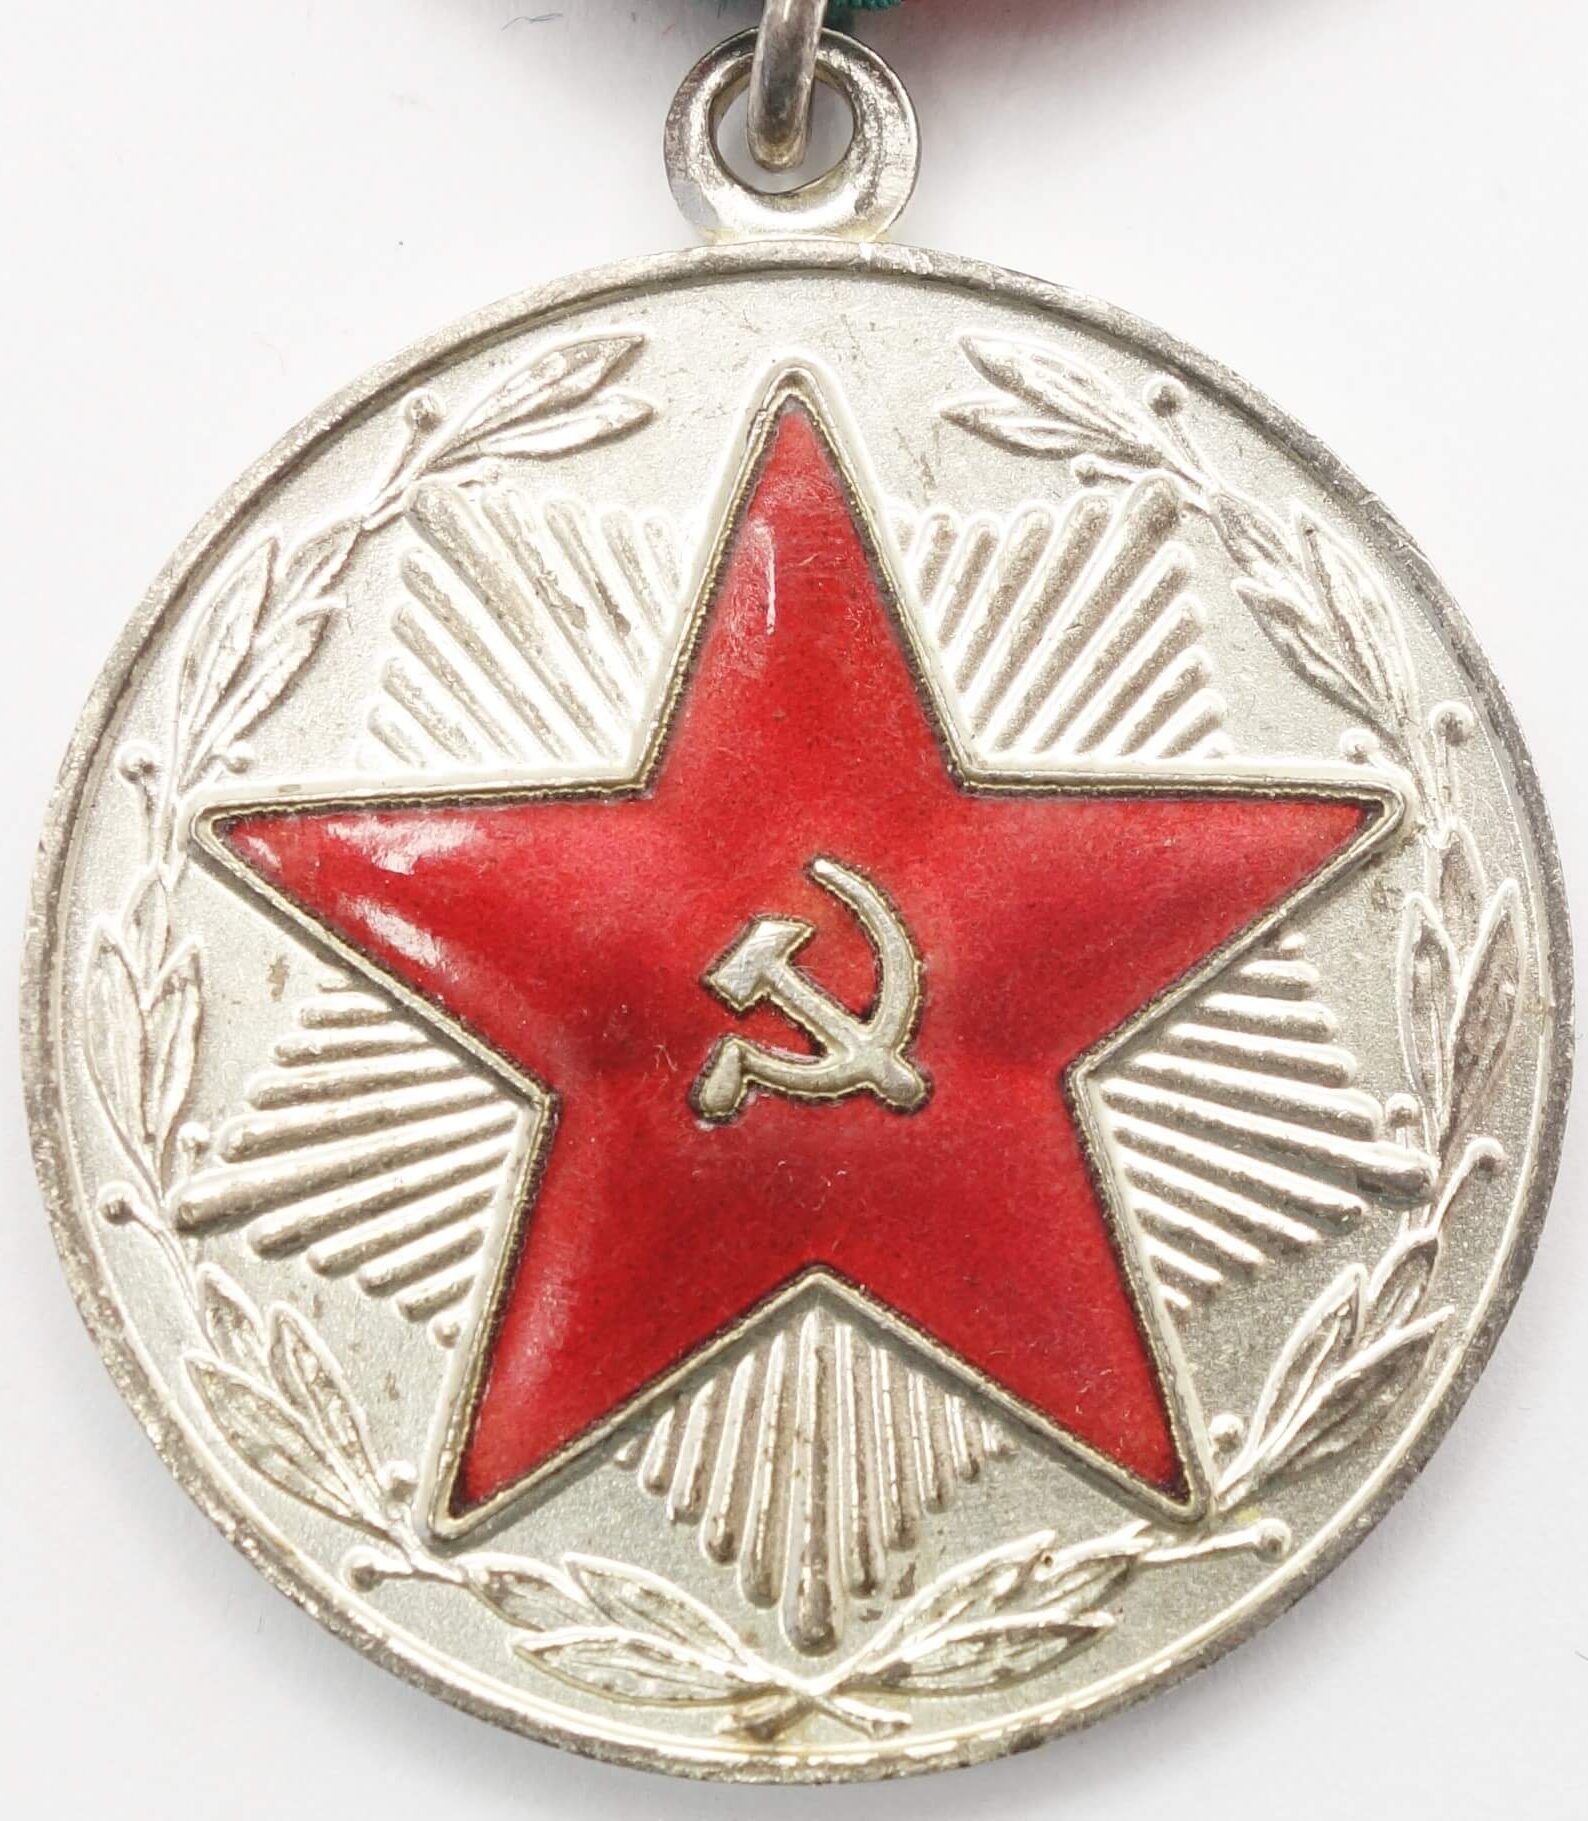 Soviet Medal for Impeccable Service 1st class